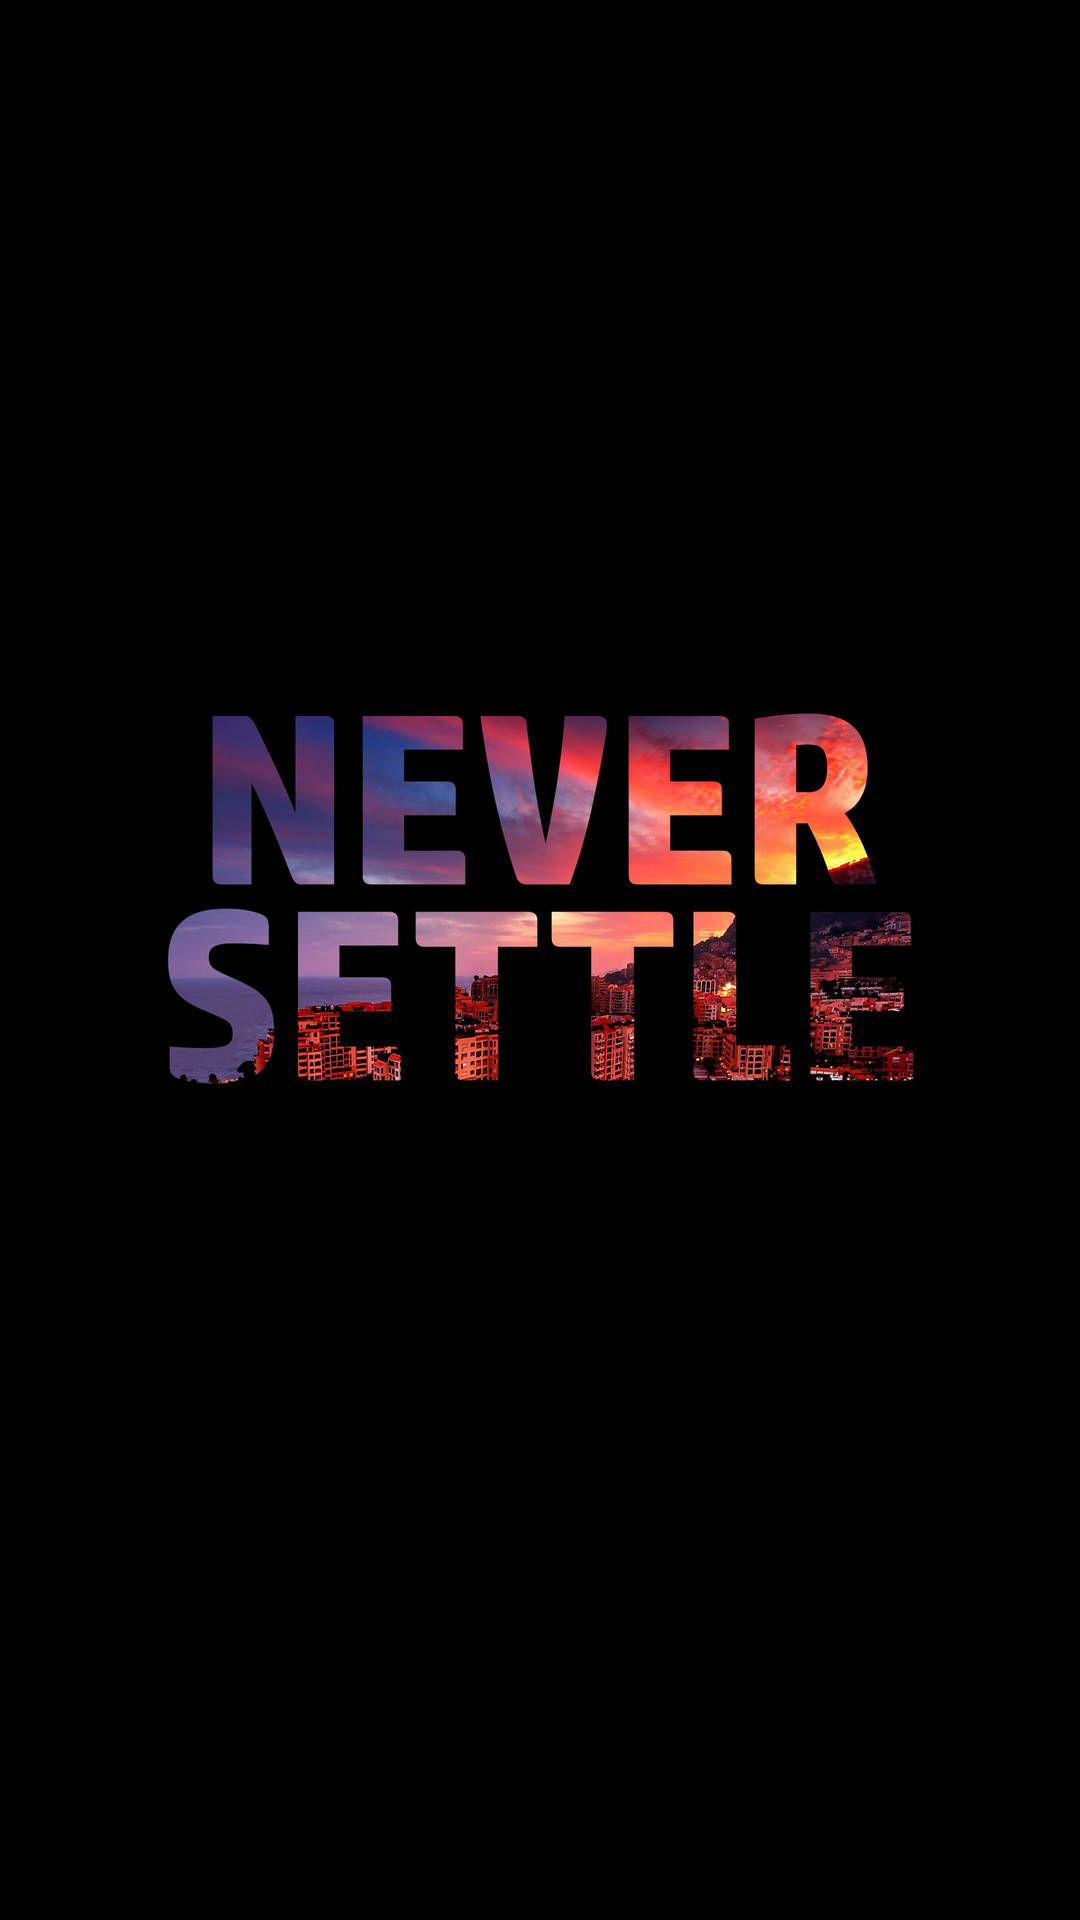 Amoled Android Quote Art Wallpaper